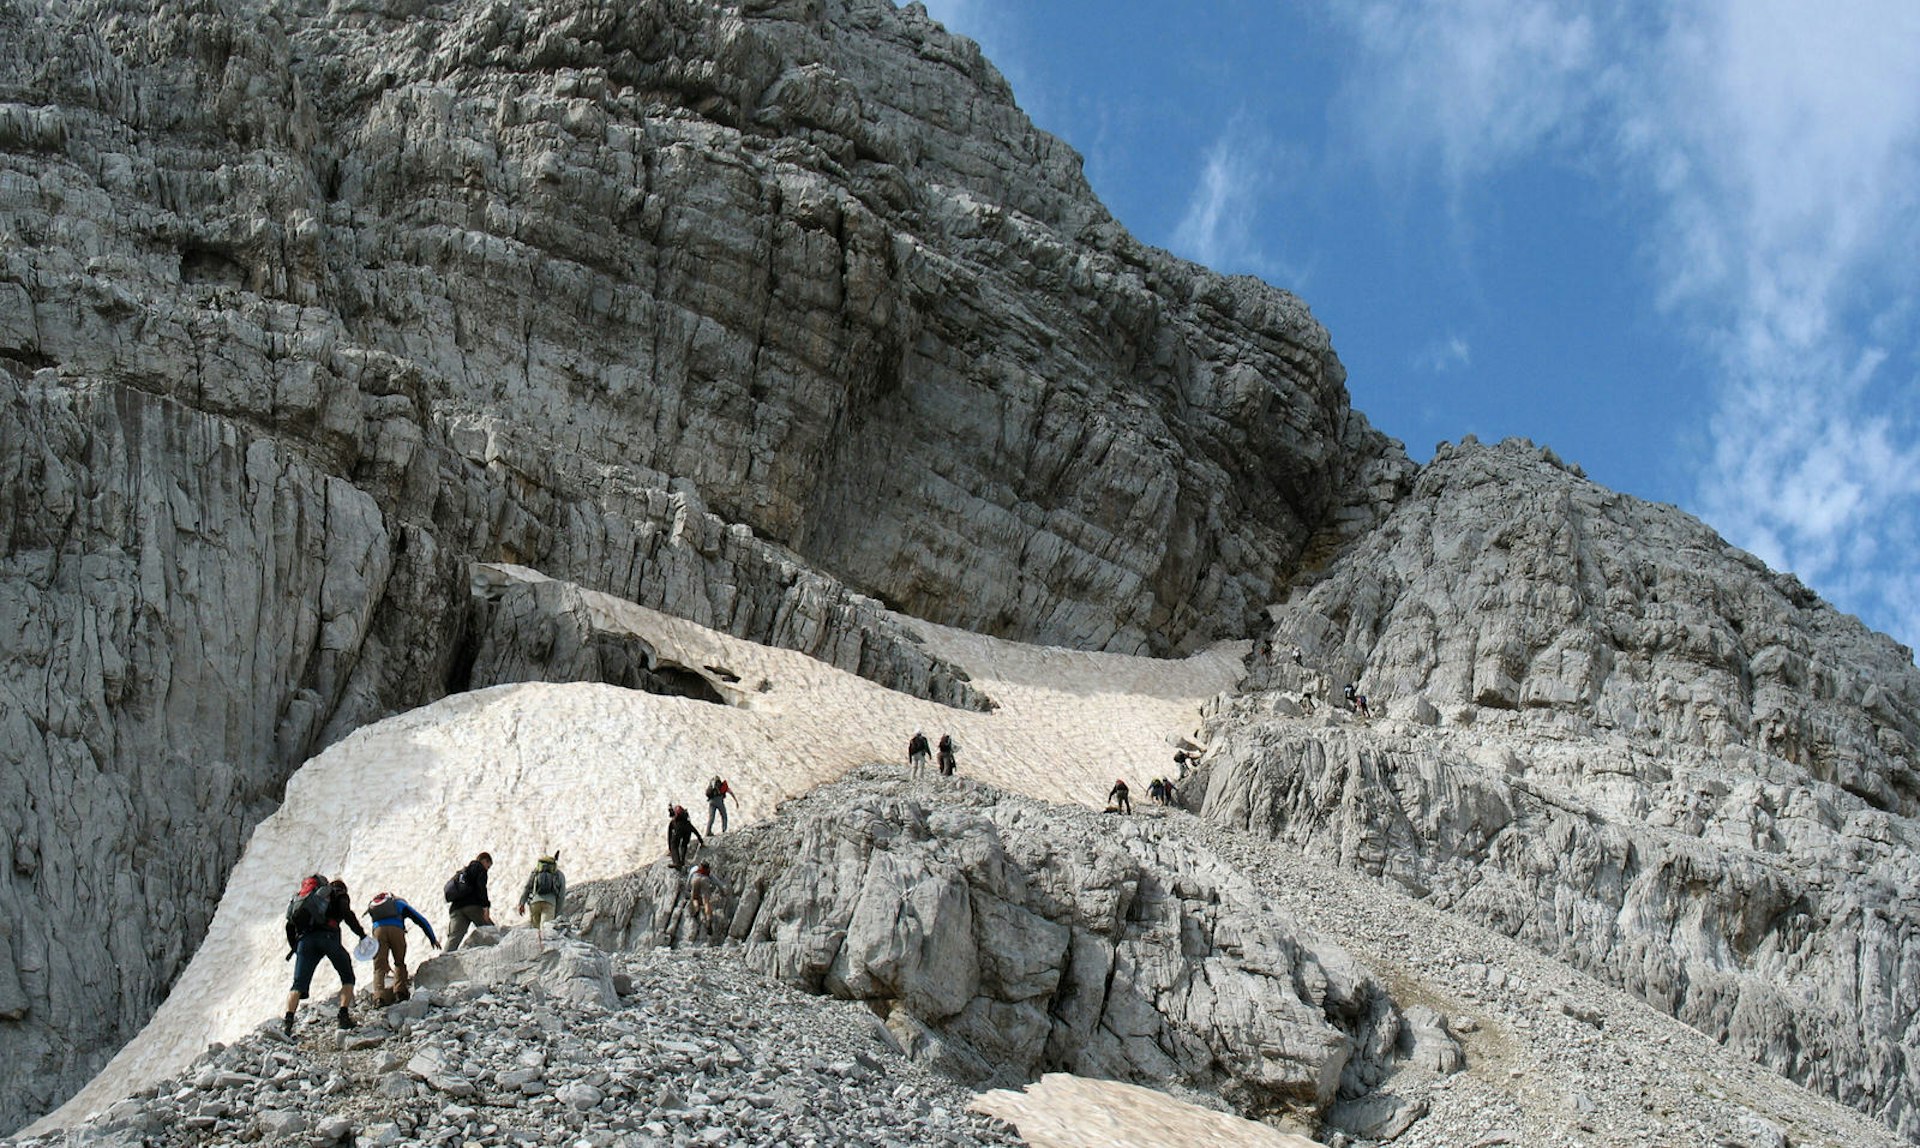 A group of hikers ascend a rocky mountain in Albania.